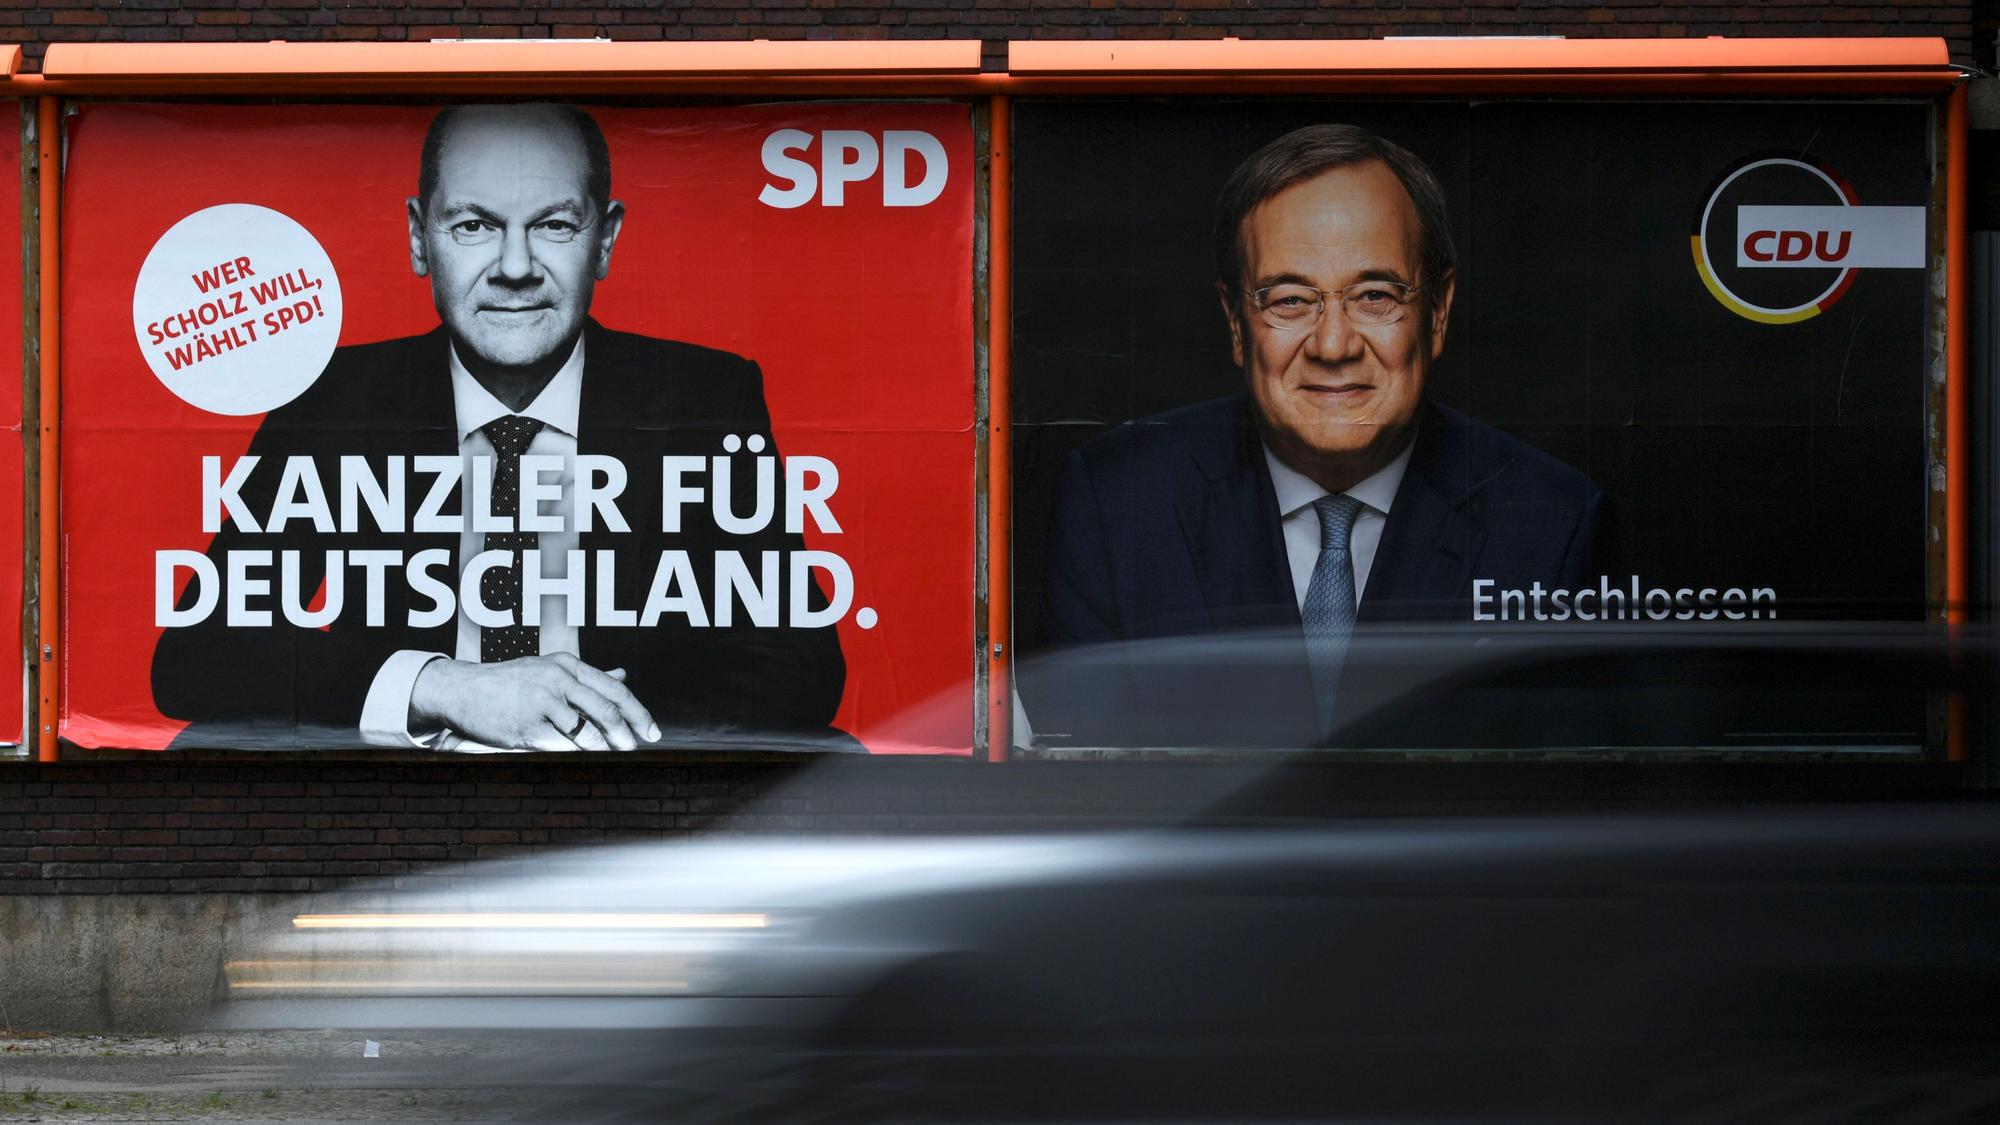 An election campaign billboard, featuring SPD's Olaf Scholz and CDU's Armin Laschet is pictured in Berlin